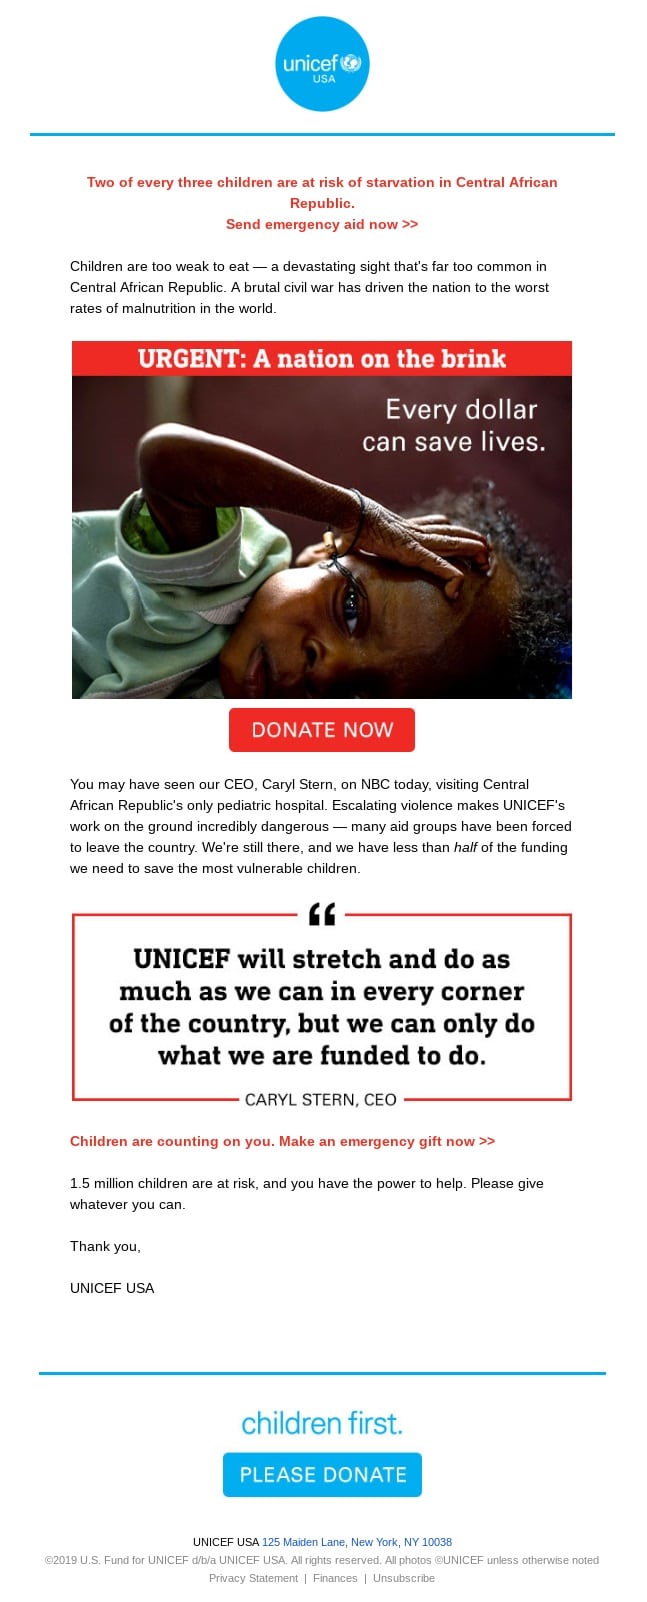 this email from unicef highlights the urgency of their need by using the CTA copy: "Donate now"